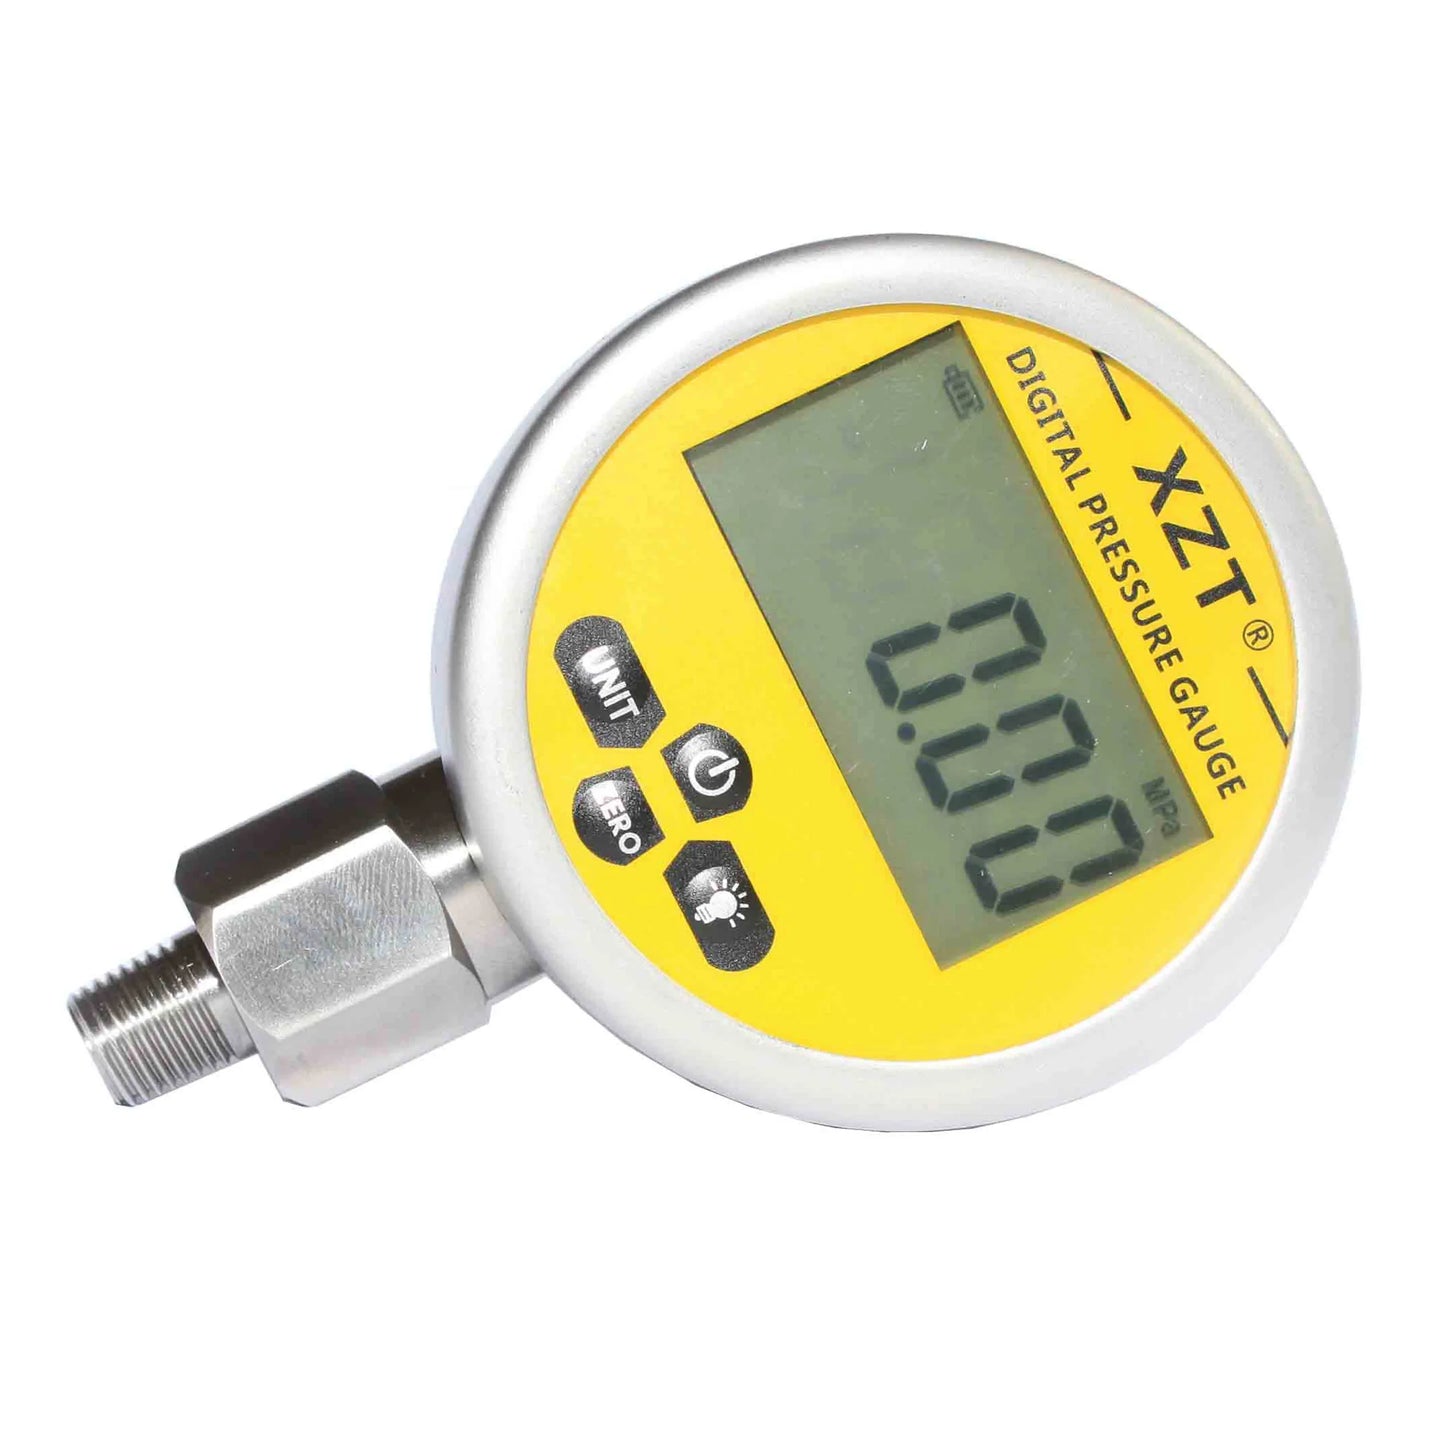 XZT 3.15" -1BAR/15 PSI~700BAR/10000 PSI Digital Hydraulic Pressure Gauge with Red Protector,1/4" NPT male connector -Base Entry, Pressure Manometer, Pressure Sensor Connector